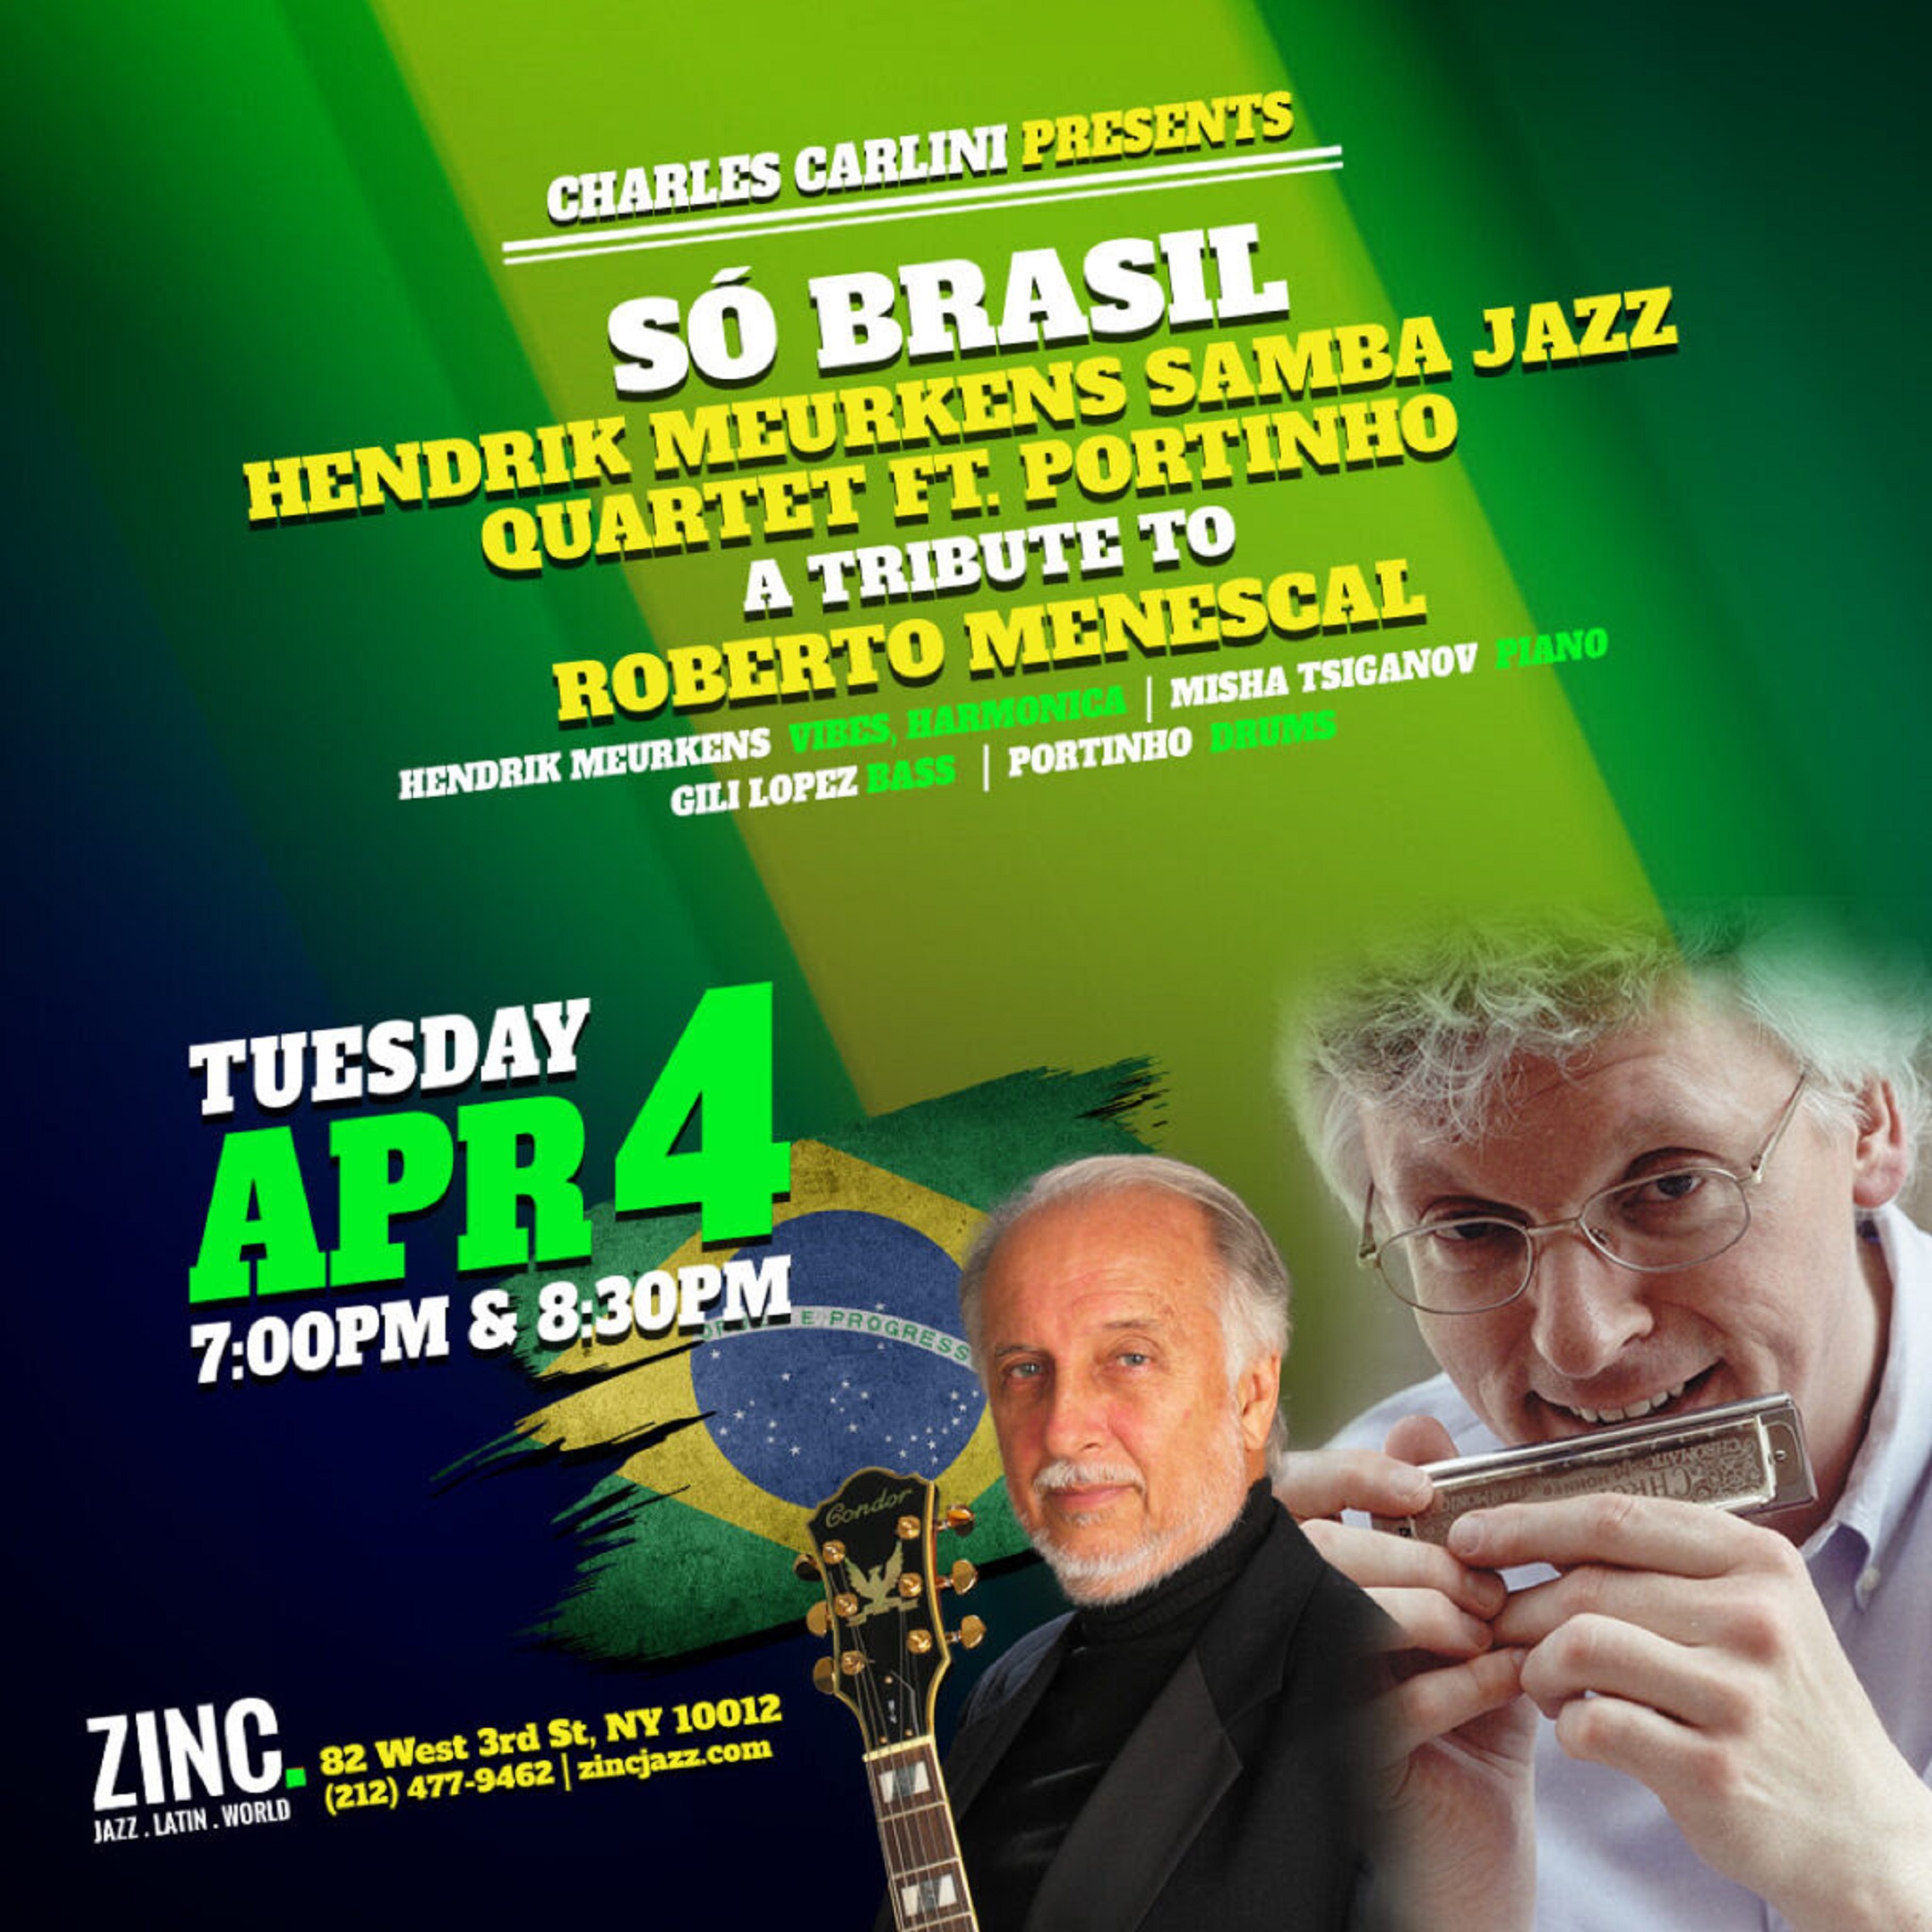 Catch Acclaimed Harmonica Player and Vibraphonist Hendrik Meurkens celebrate the music of the great Roberto Menescal at Zinc on Tuesday, April 4